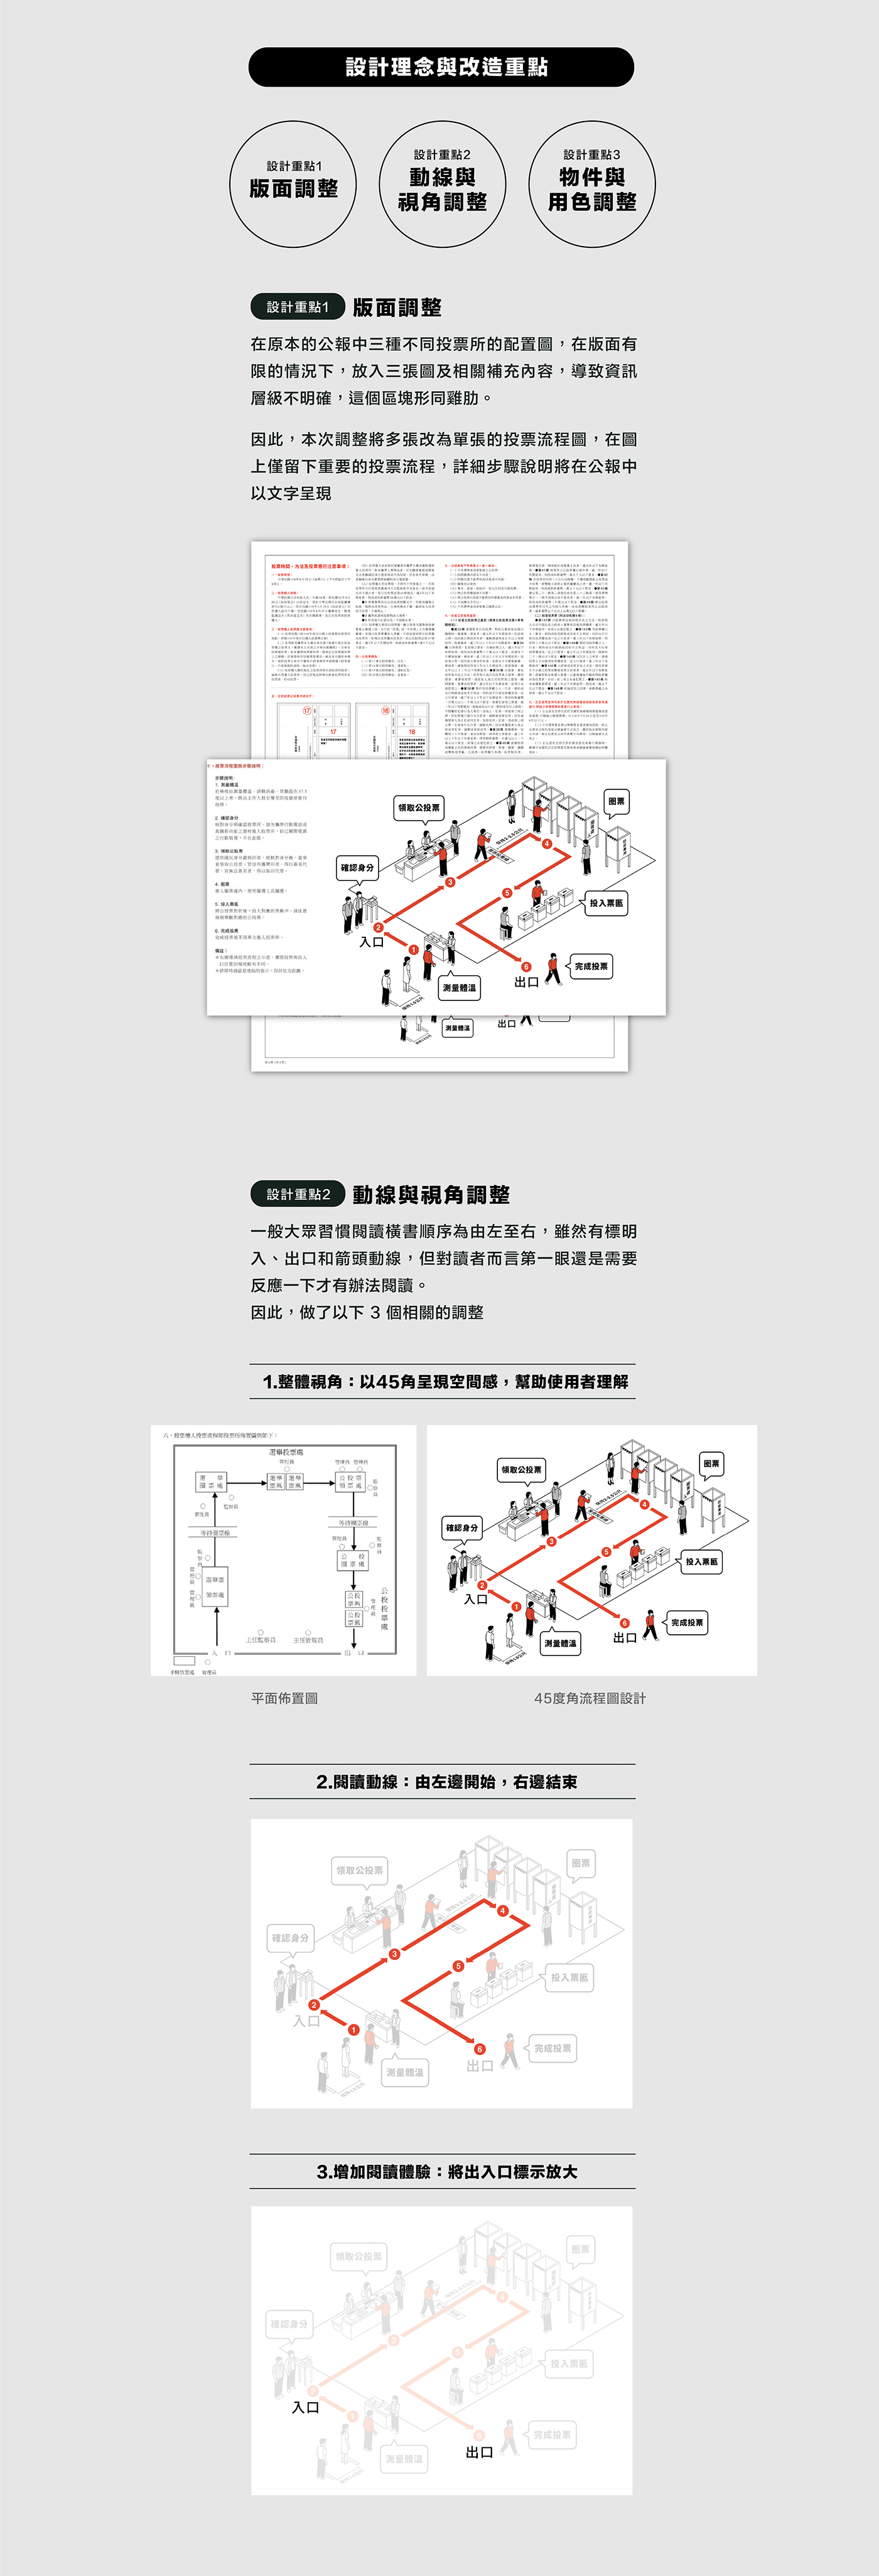 bulletin design Guide ILLUSTRATION  infographic infographics information instructions taiwan vote